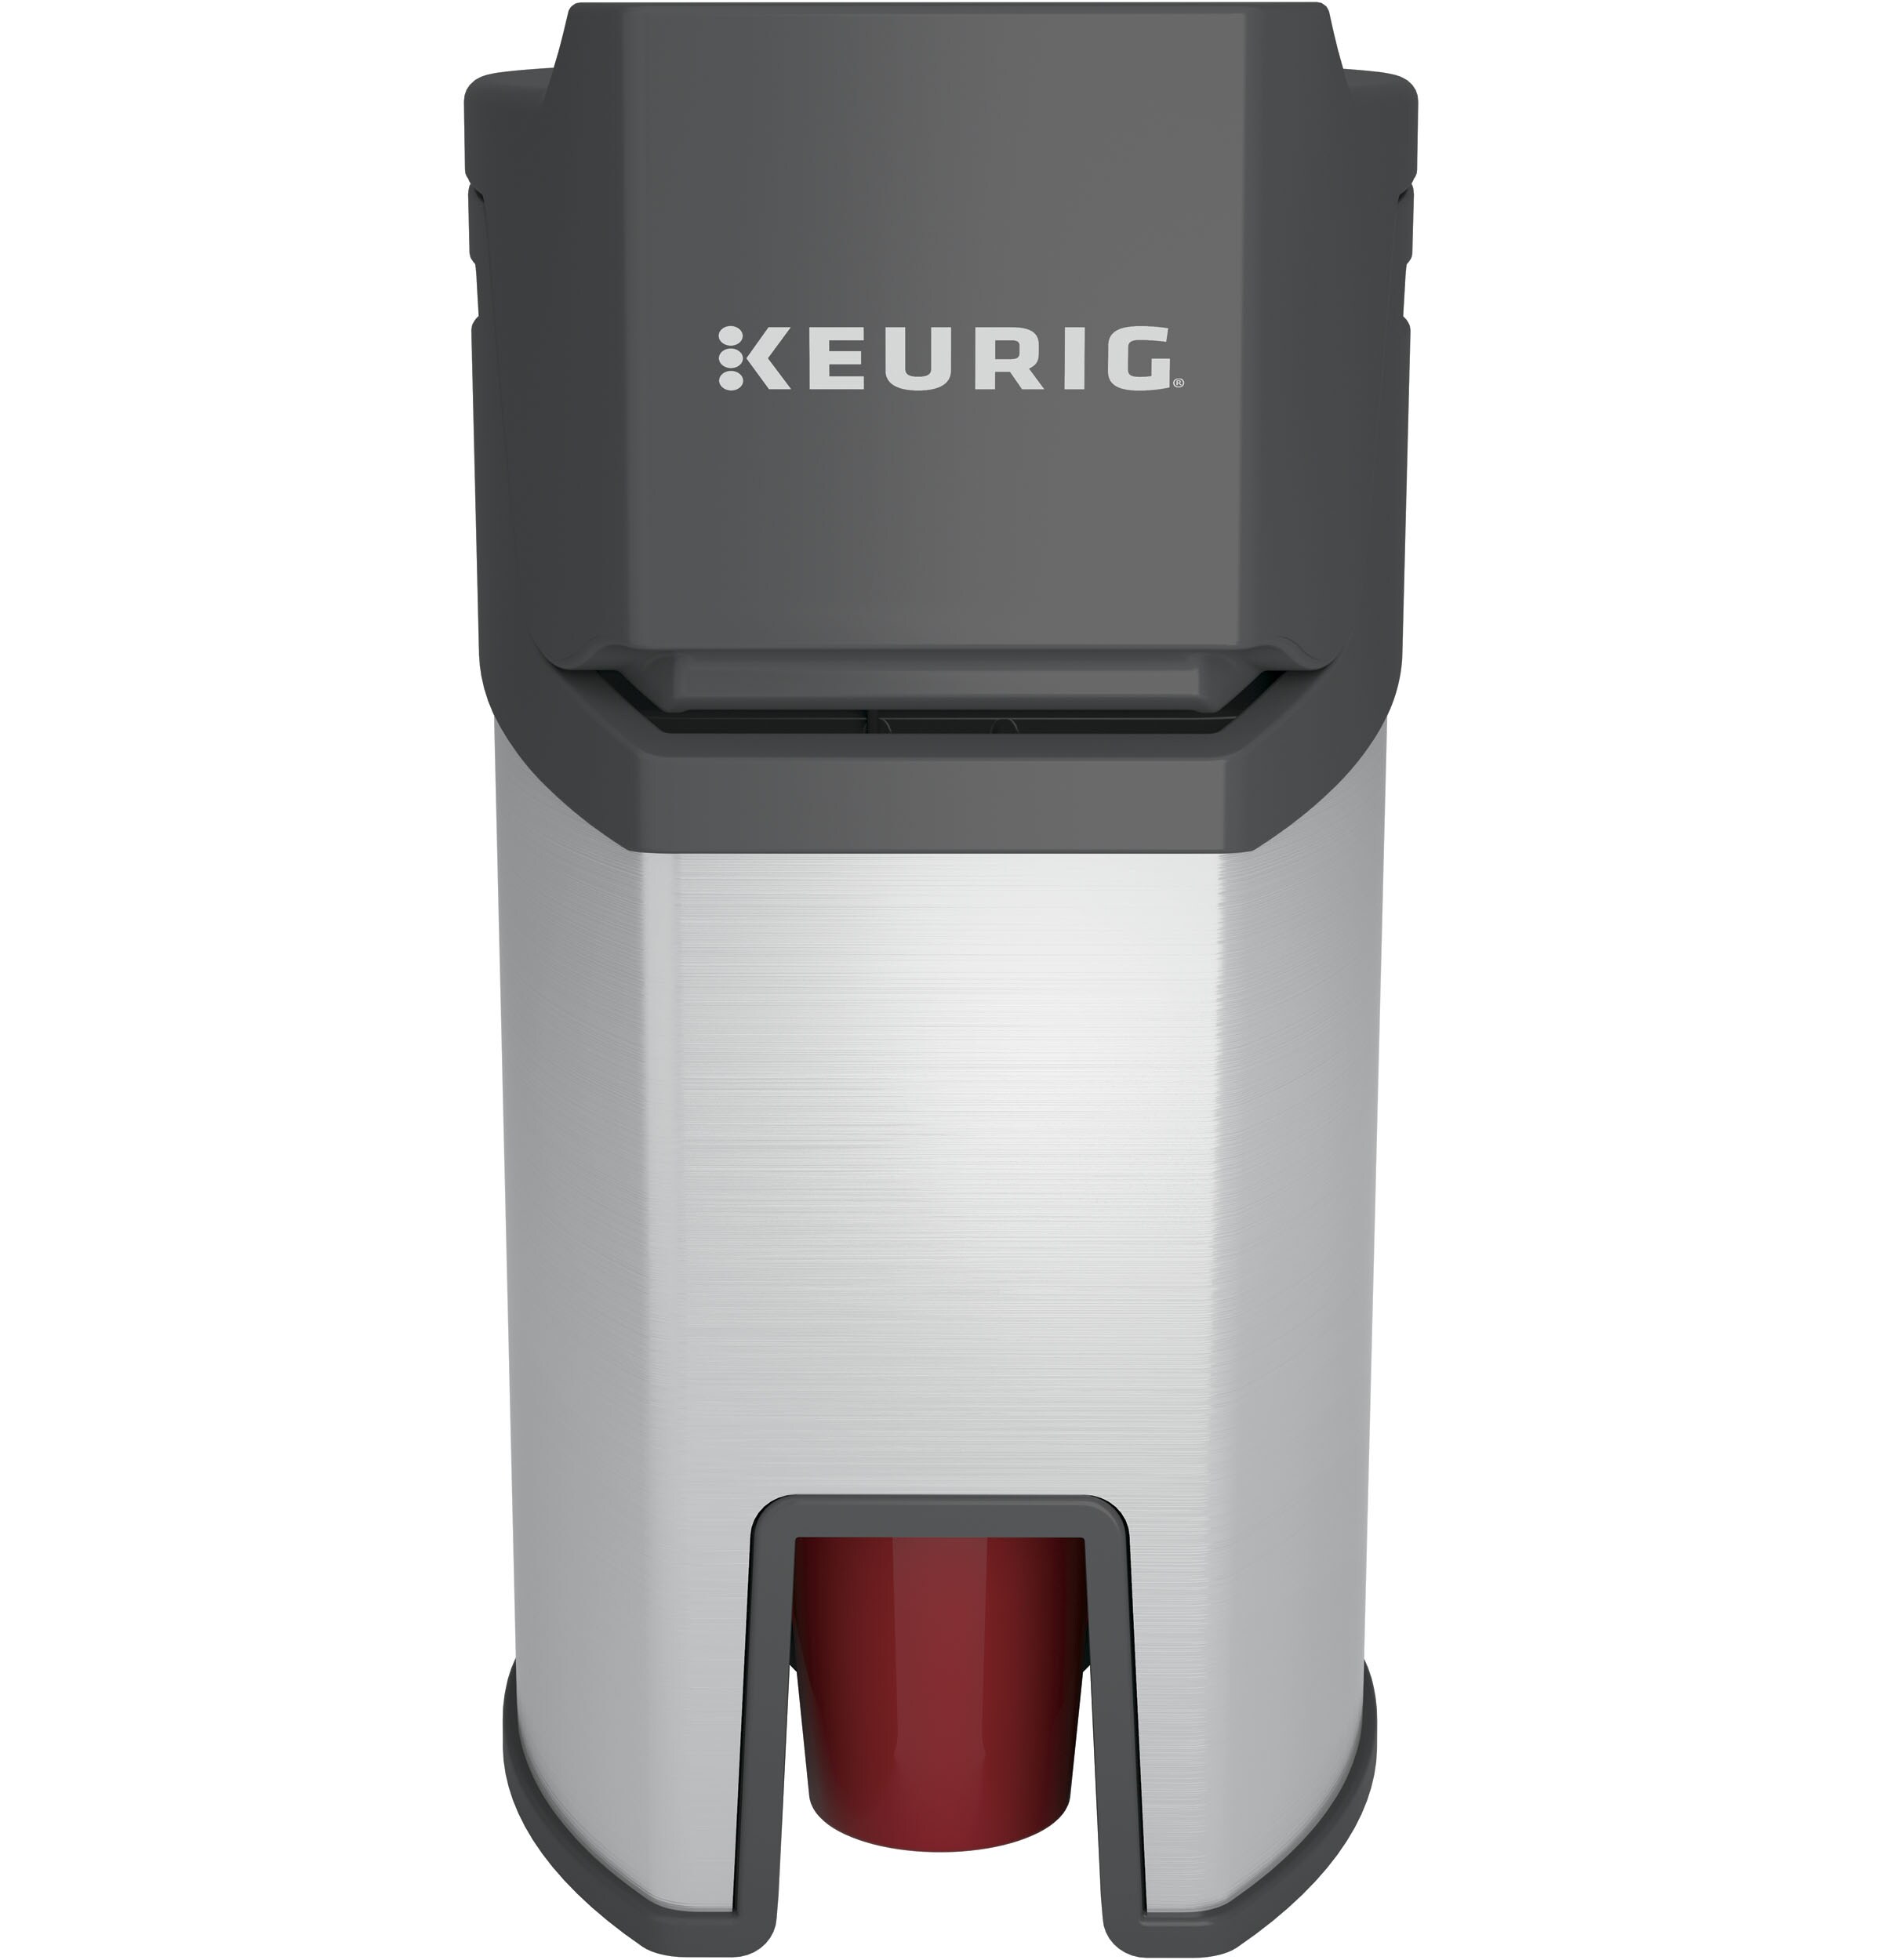 Keurig iced coffee maker • Compare best prices now »